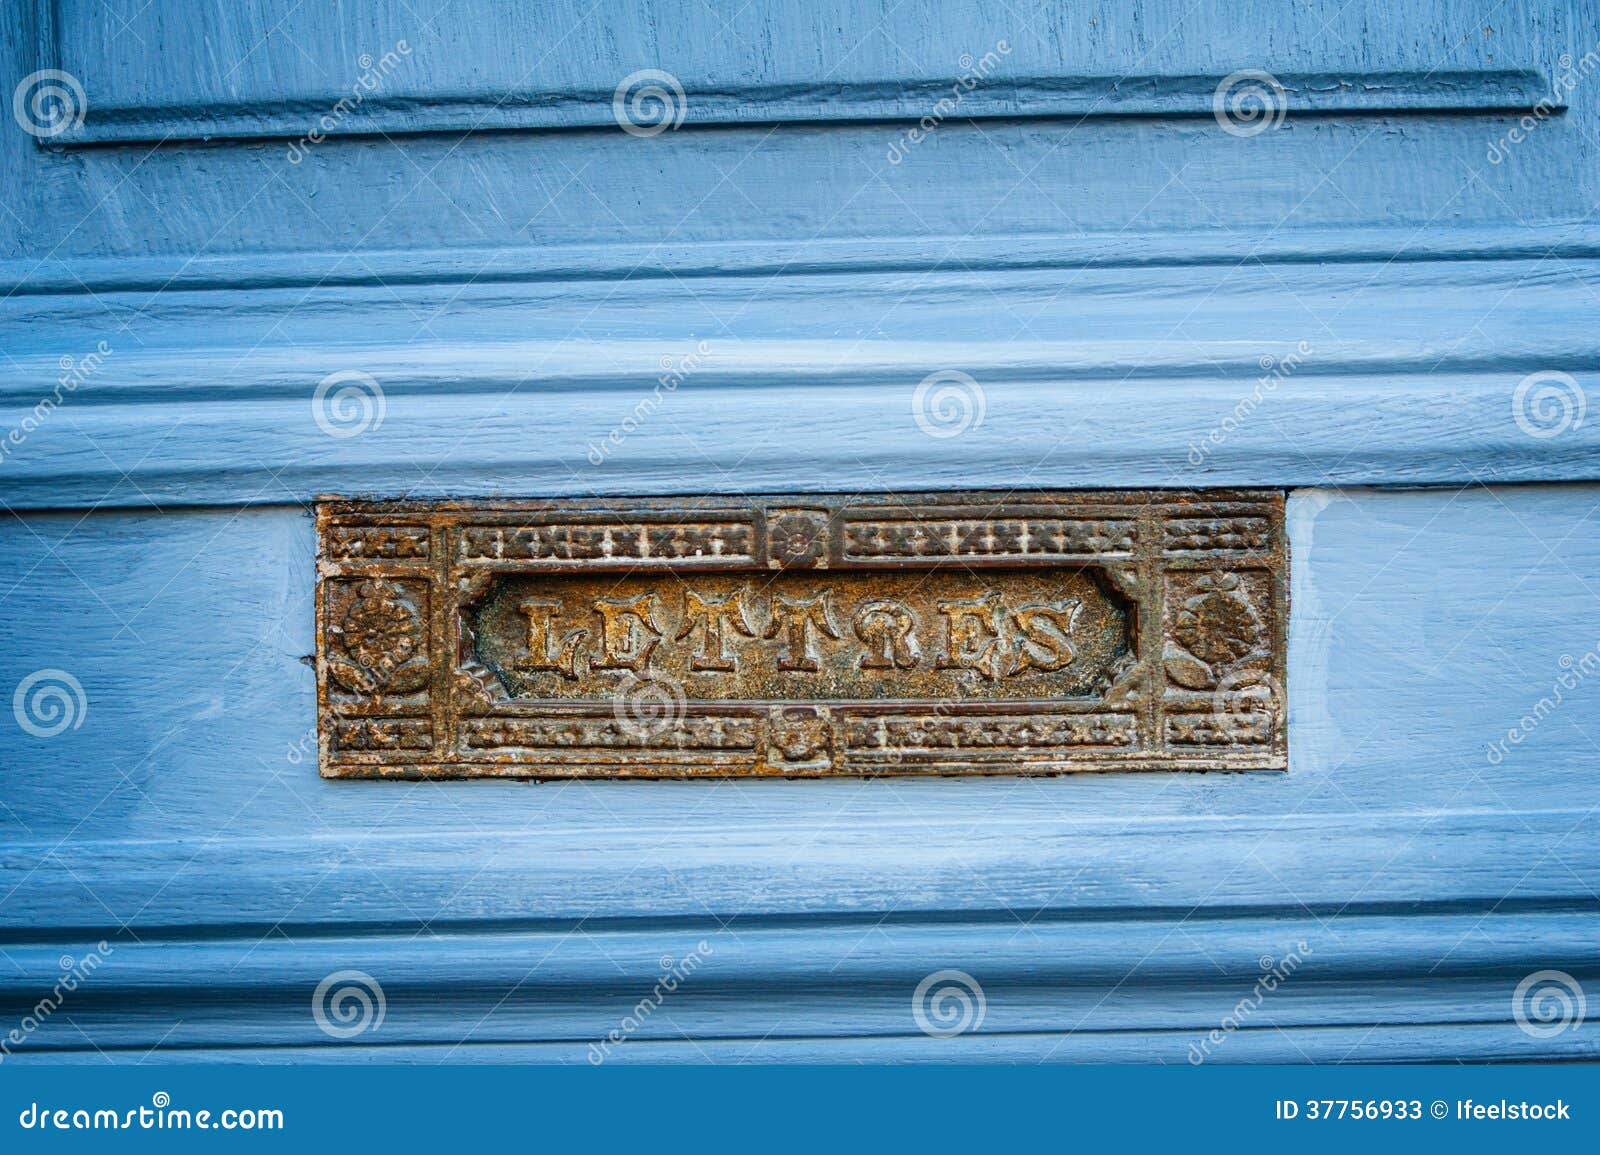 vintage french letterbox